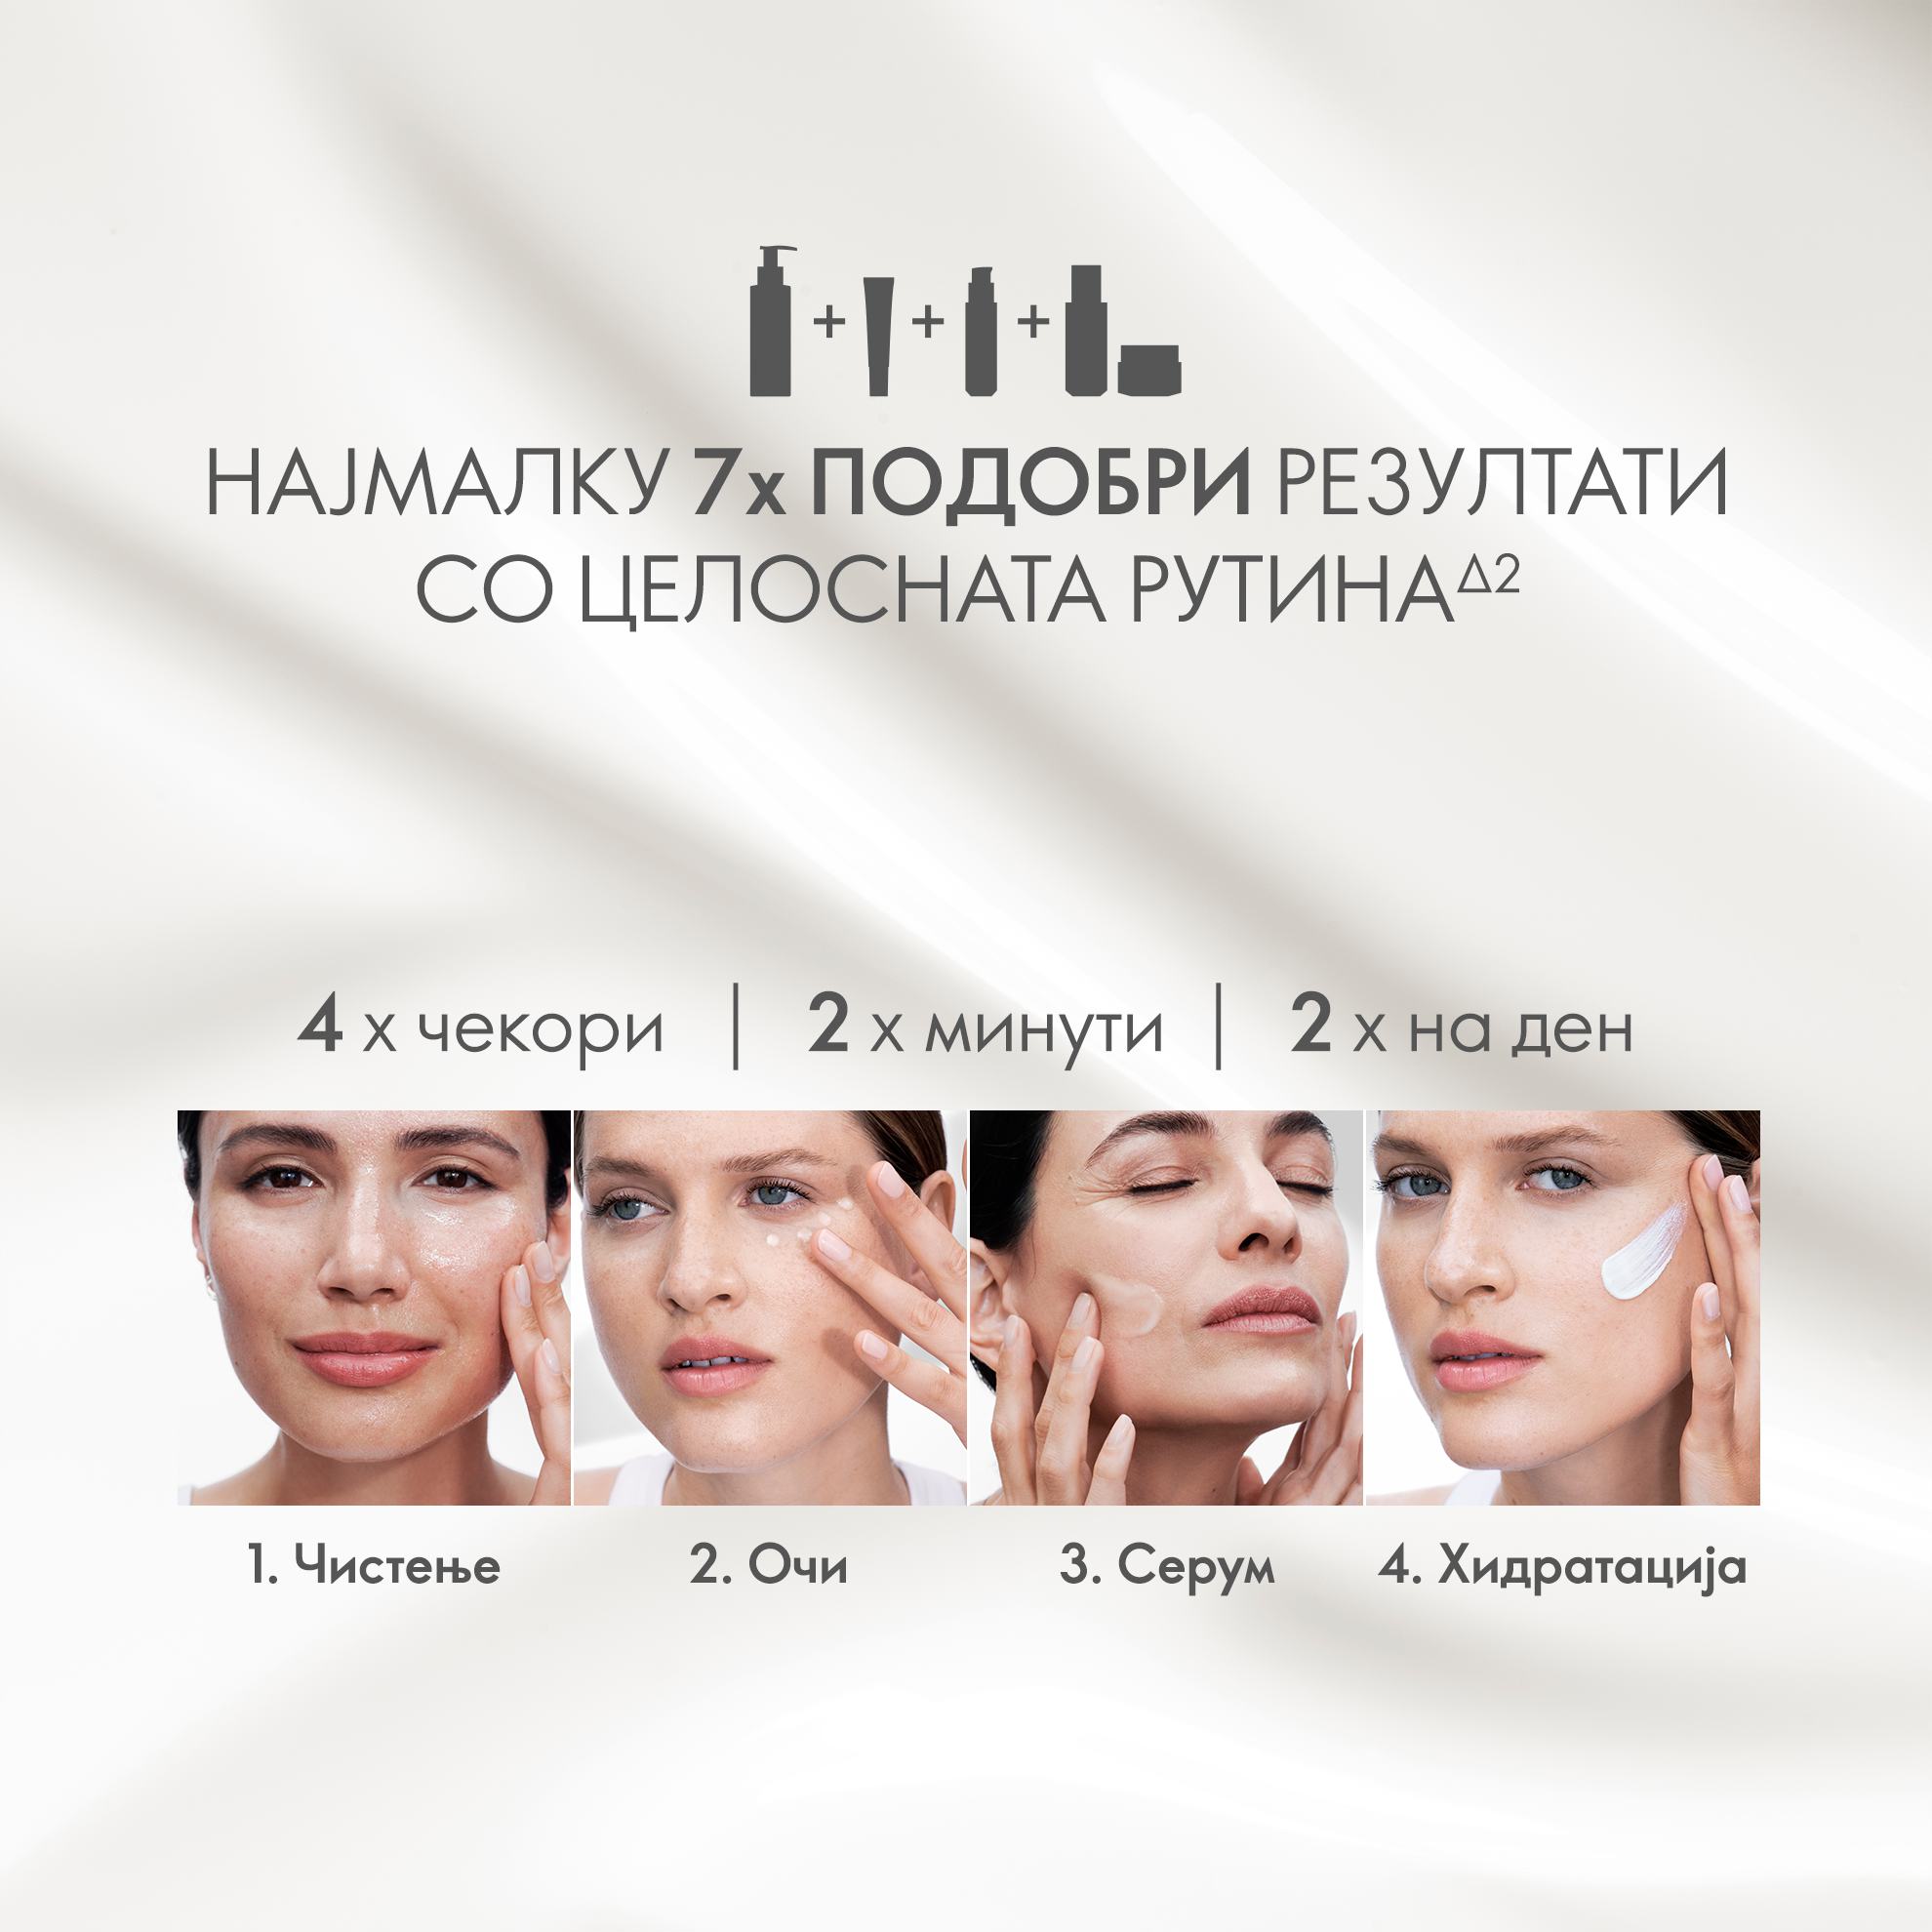 https://media-cdn.oriflame.com/productImage?externalMediaId=product-management-media%2fProducts%2f43691%2fMK%2f43691_3.png&id=17551378&version=2